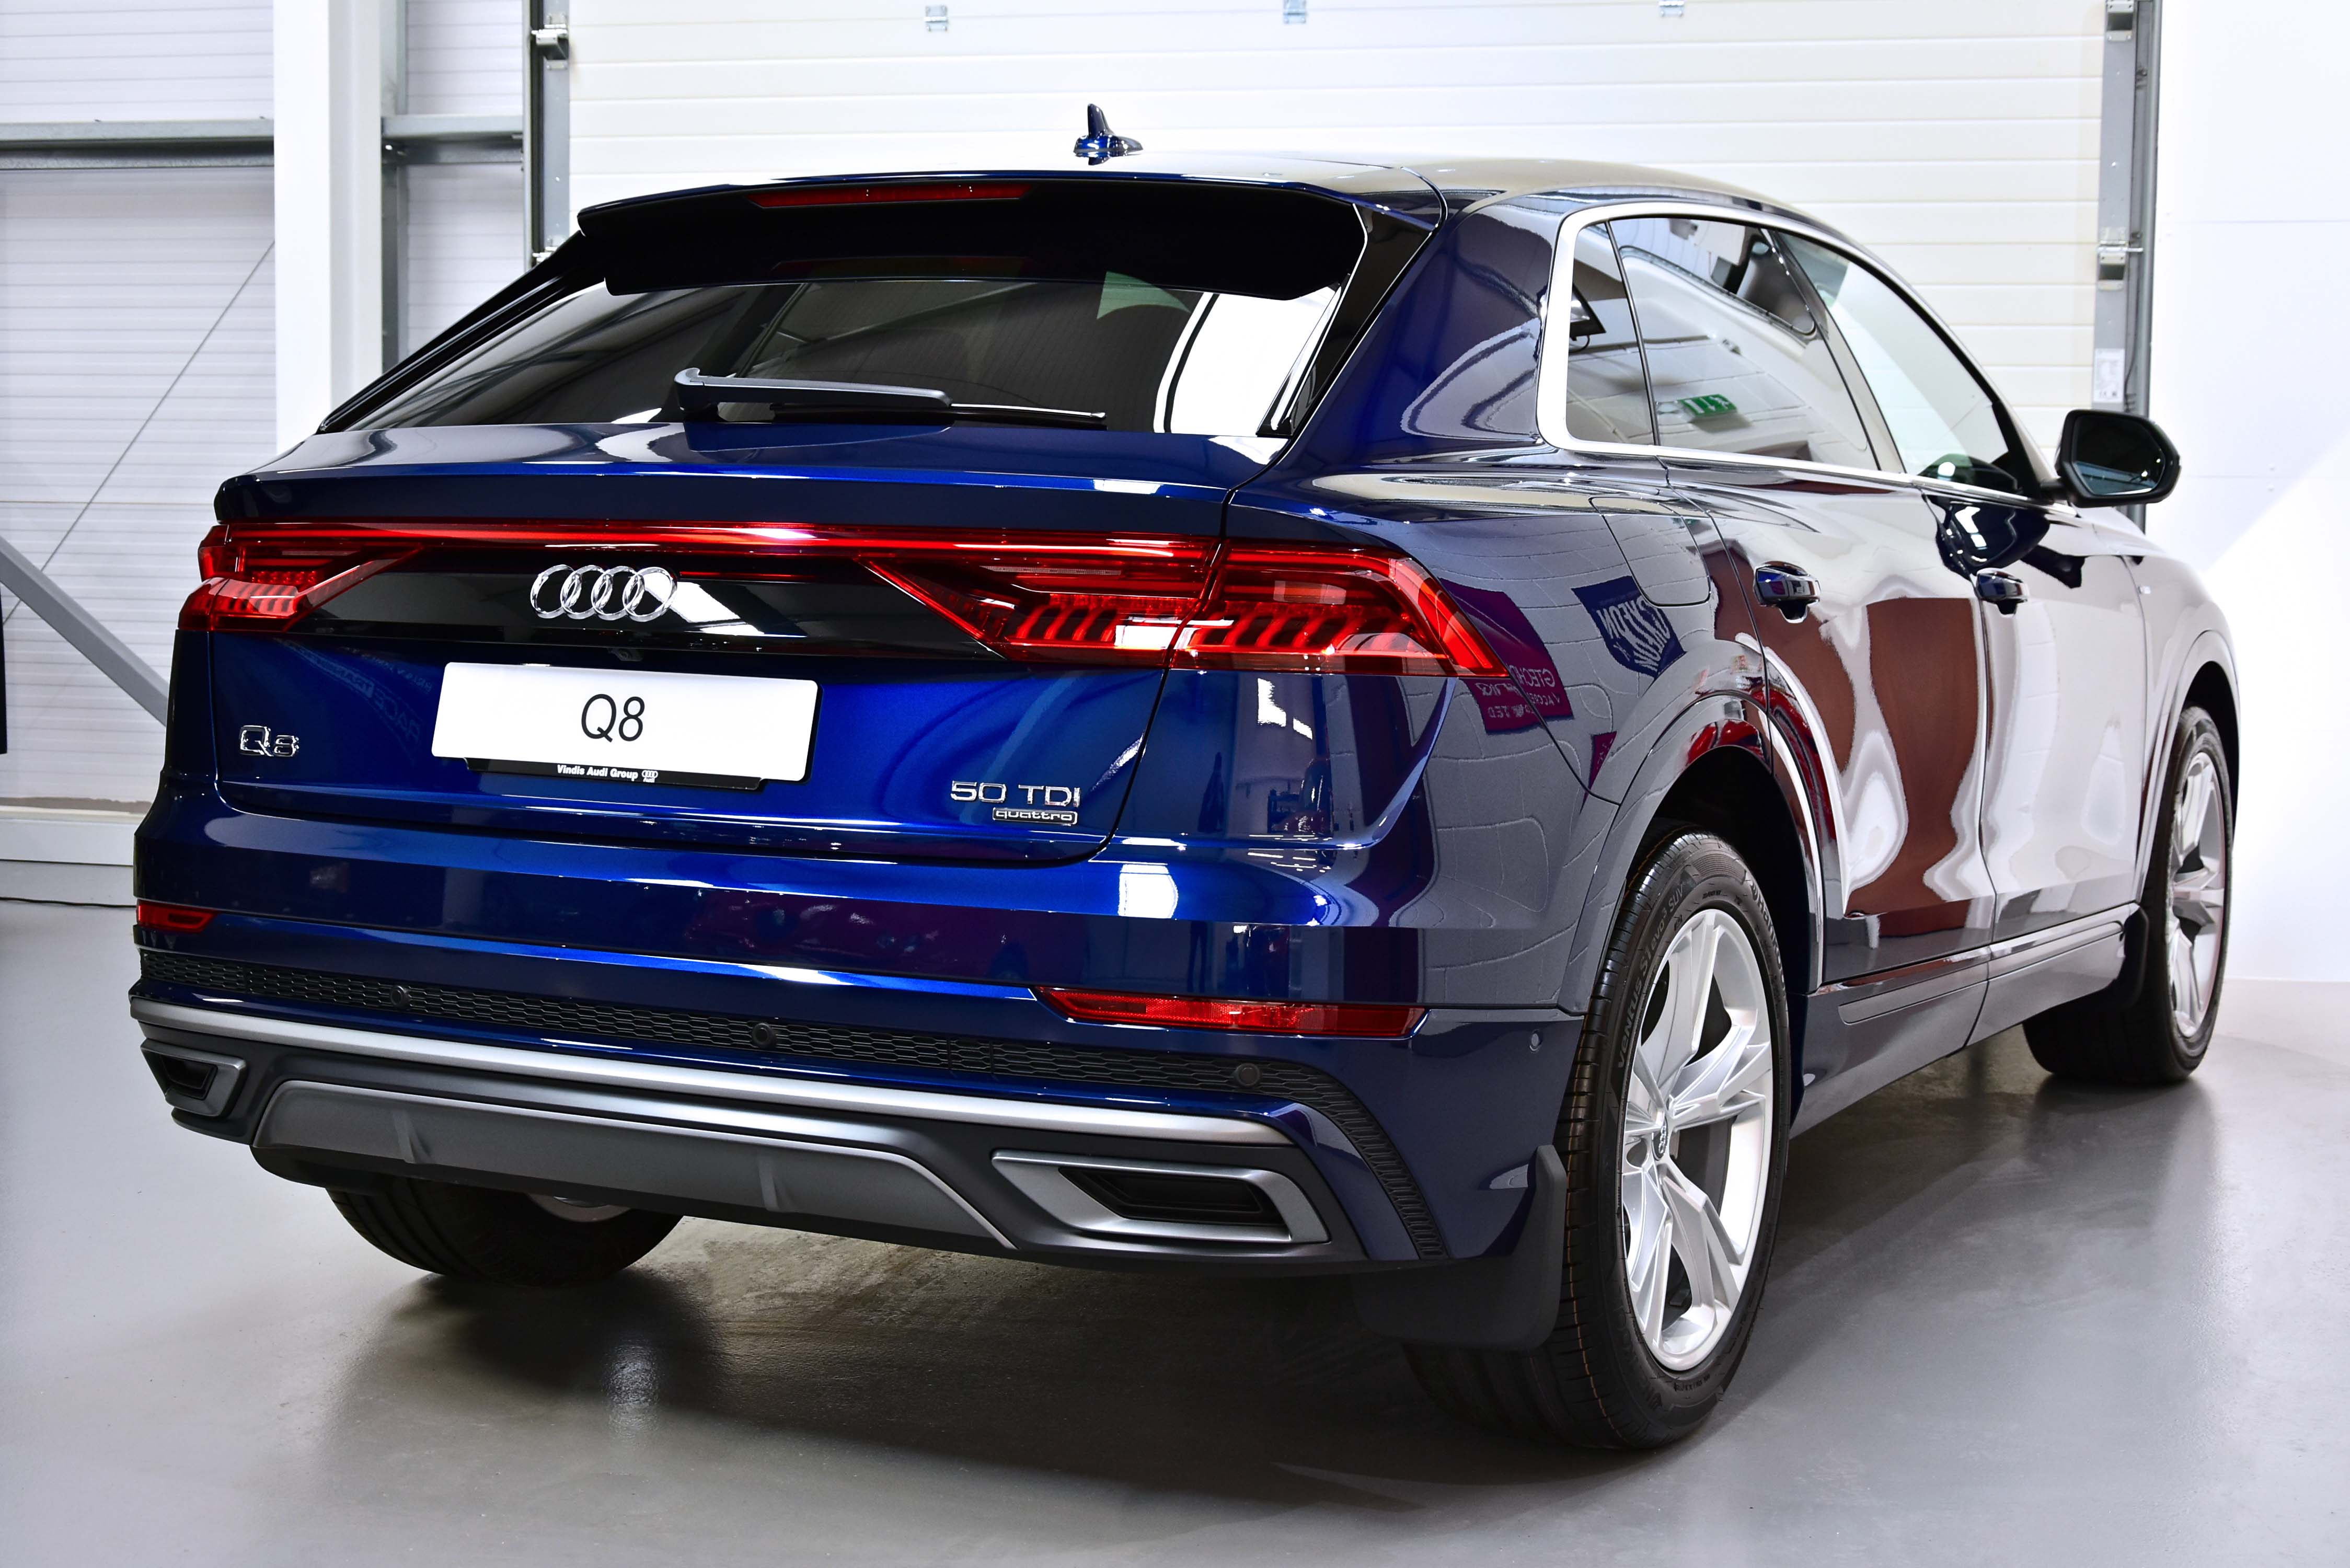 Audi Q8 New Car Enhancement and Protection Detail with Gtechniq Crystal Serum Ultra and EXOv4